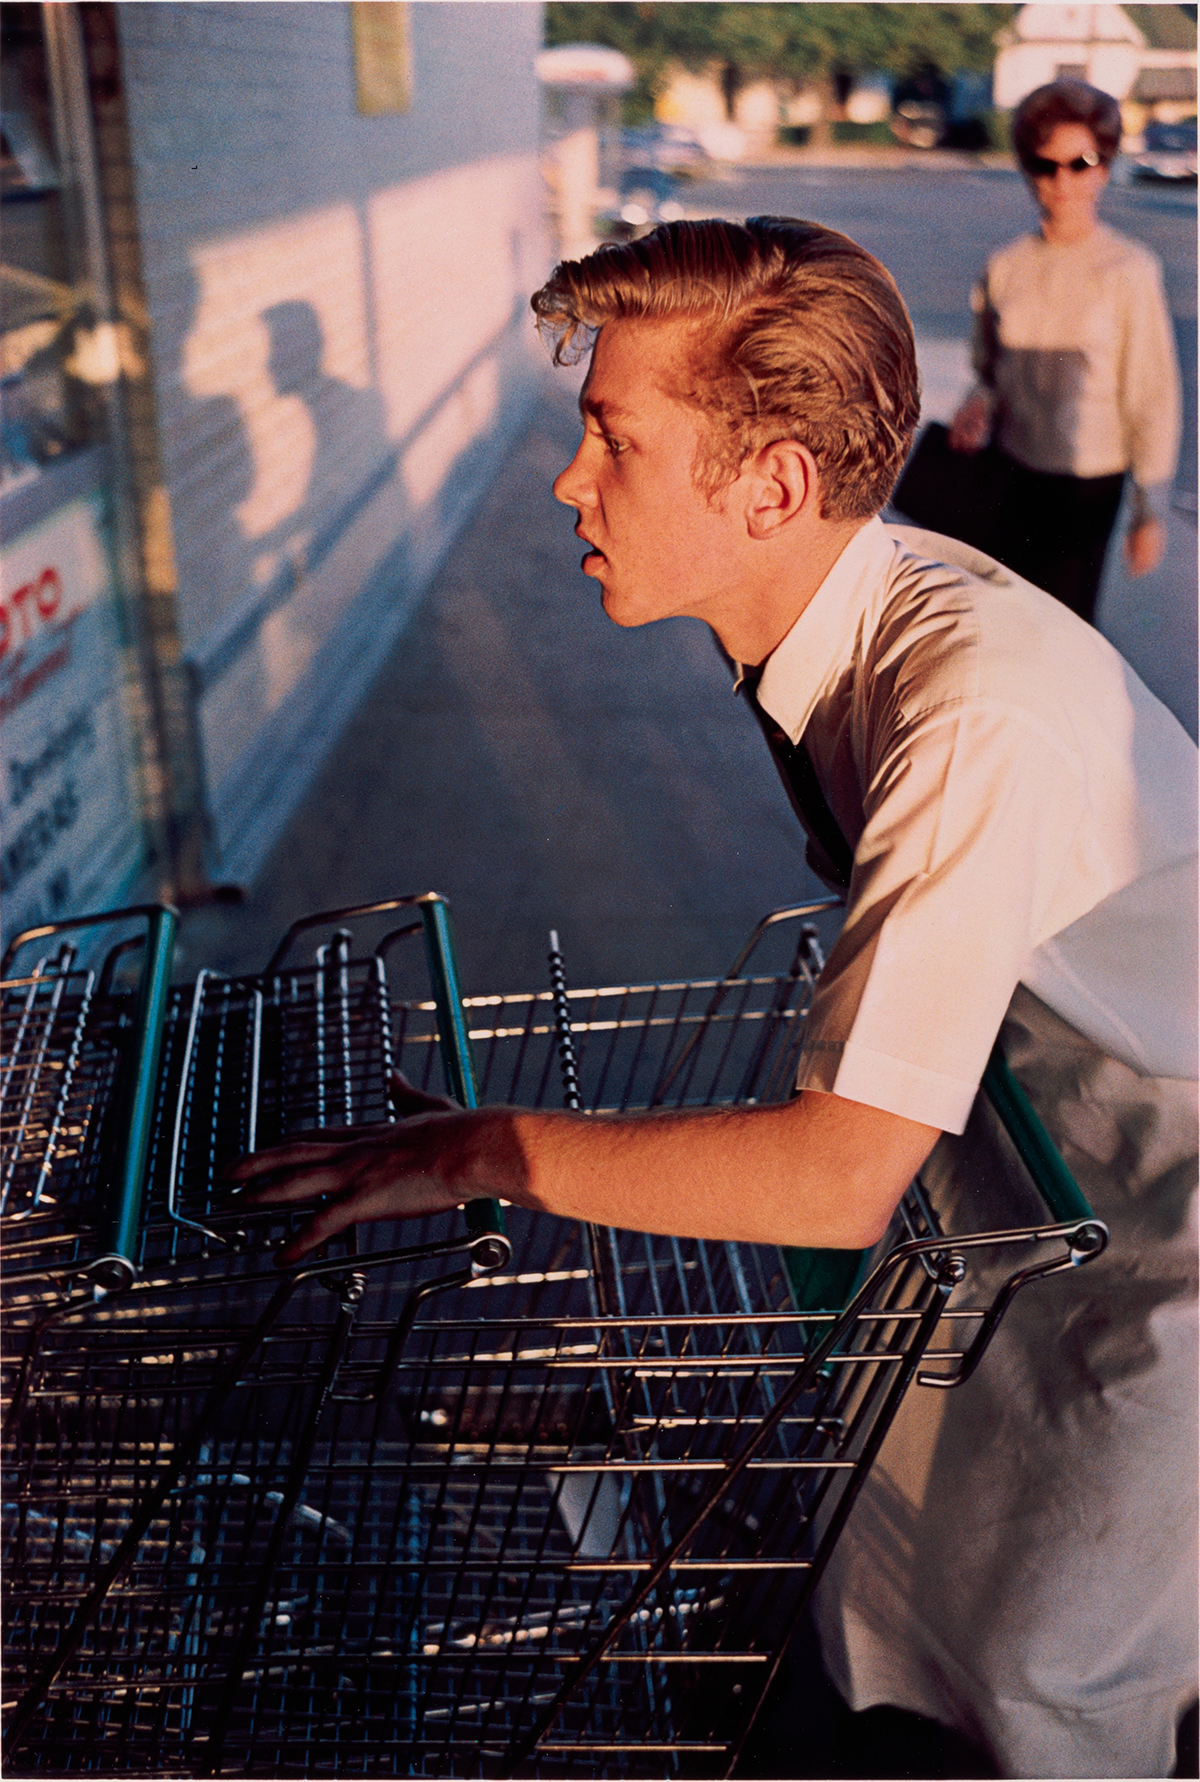 First colour photograph of a young clerk pushing a trolley by William Eggleston, Memphis